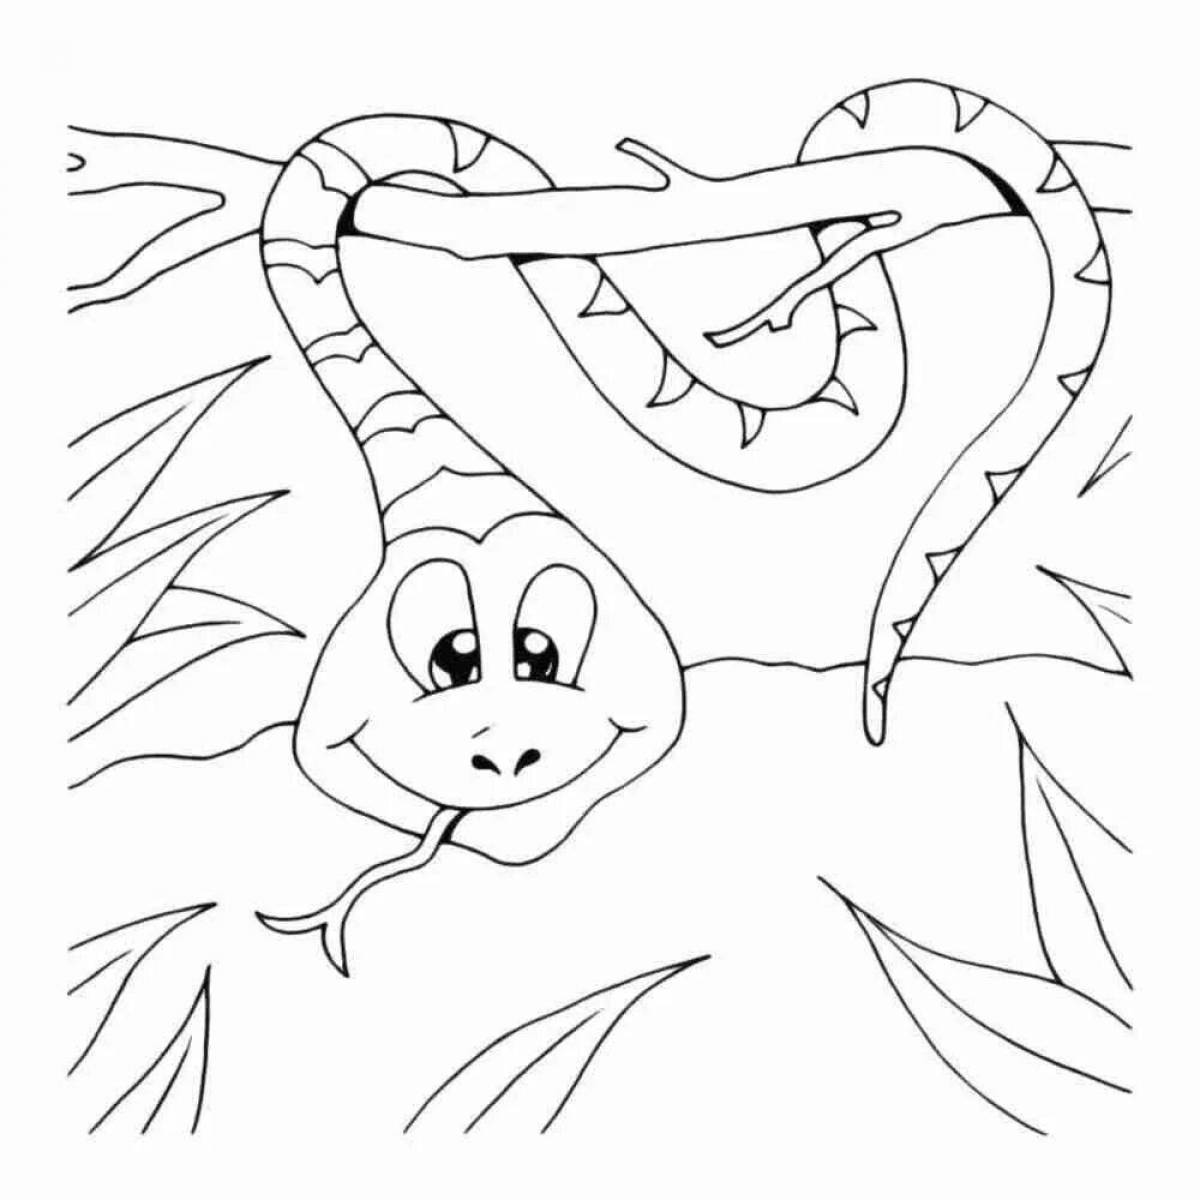 Colorful snake coloring page for 5-6 year olds